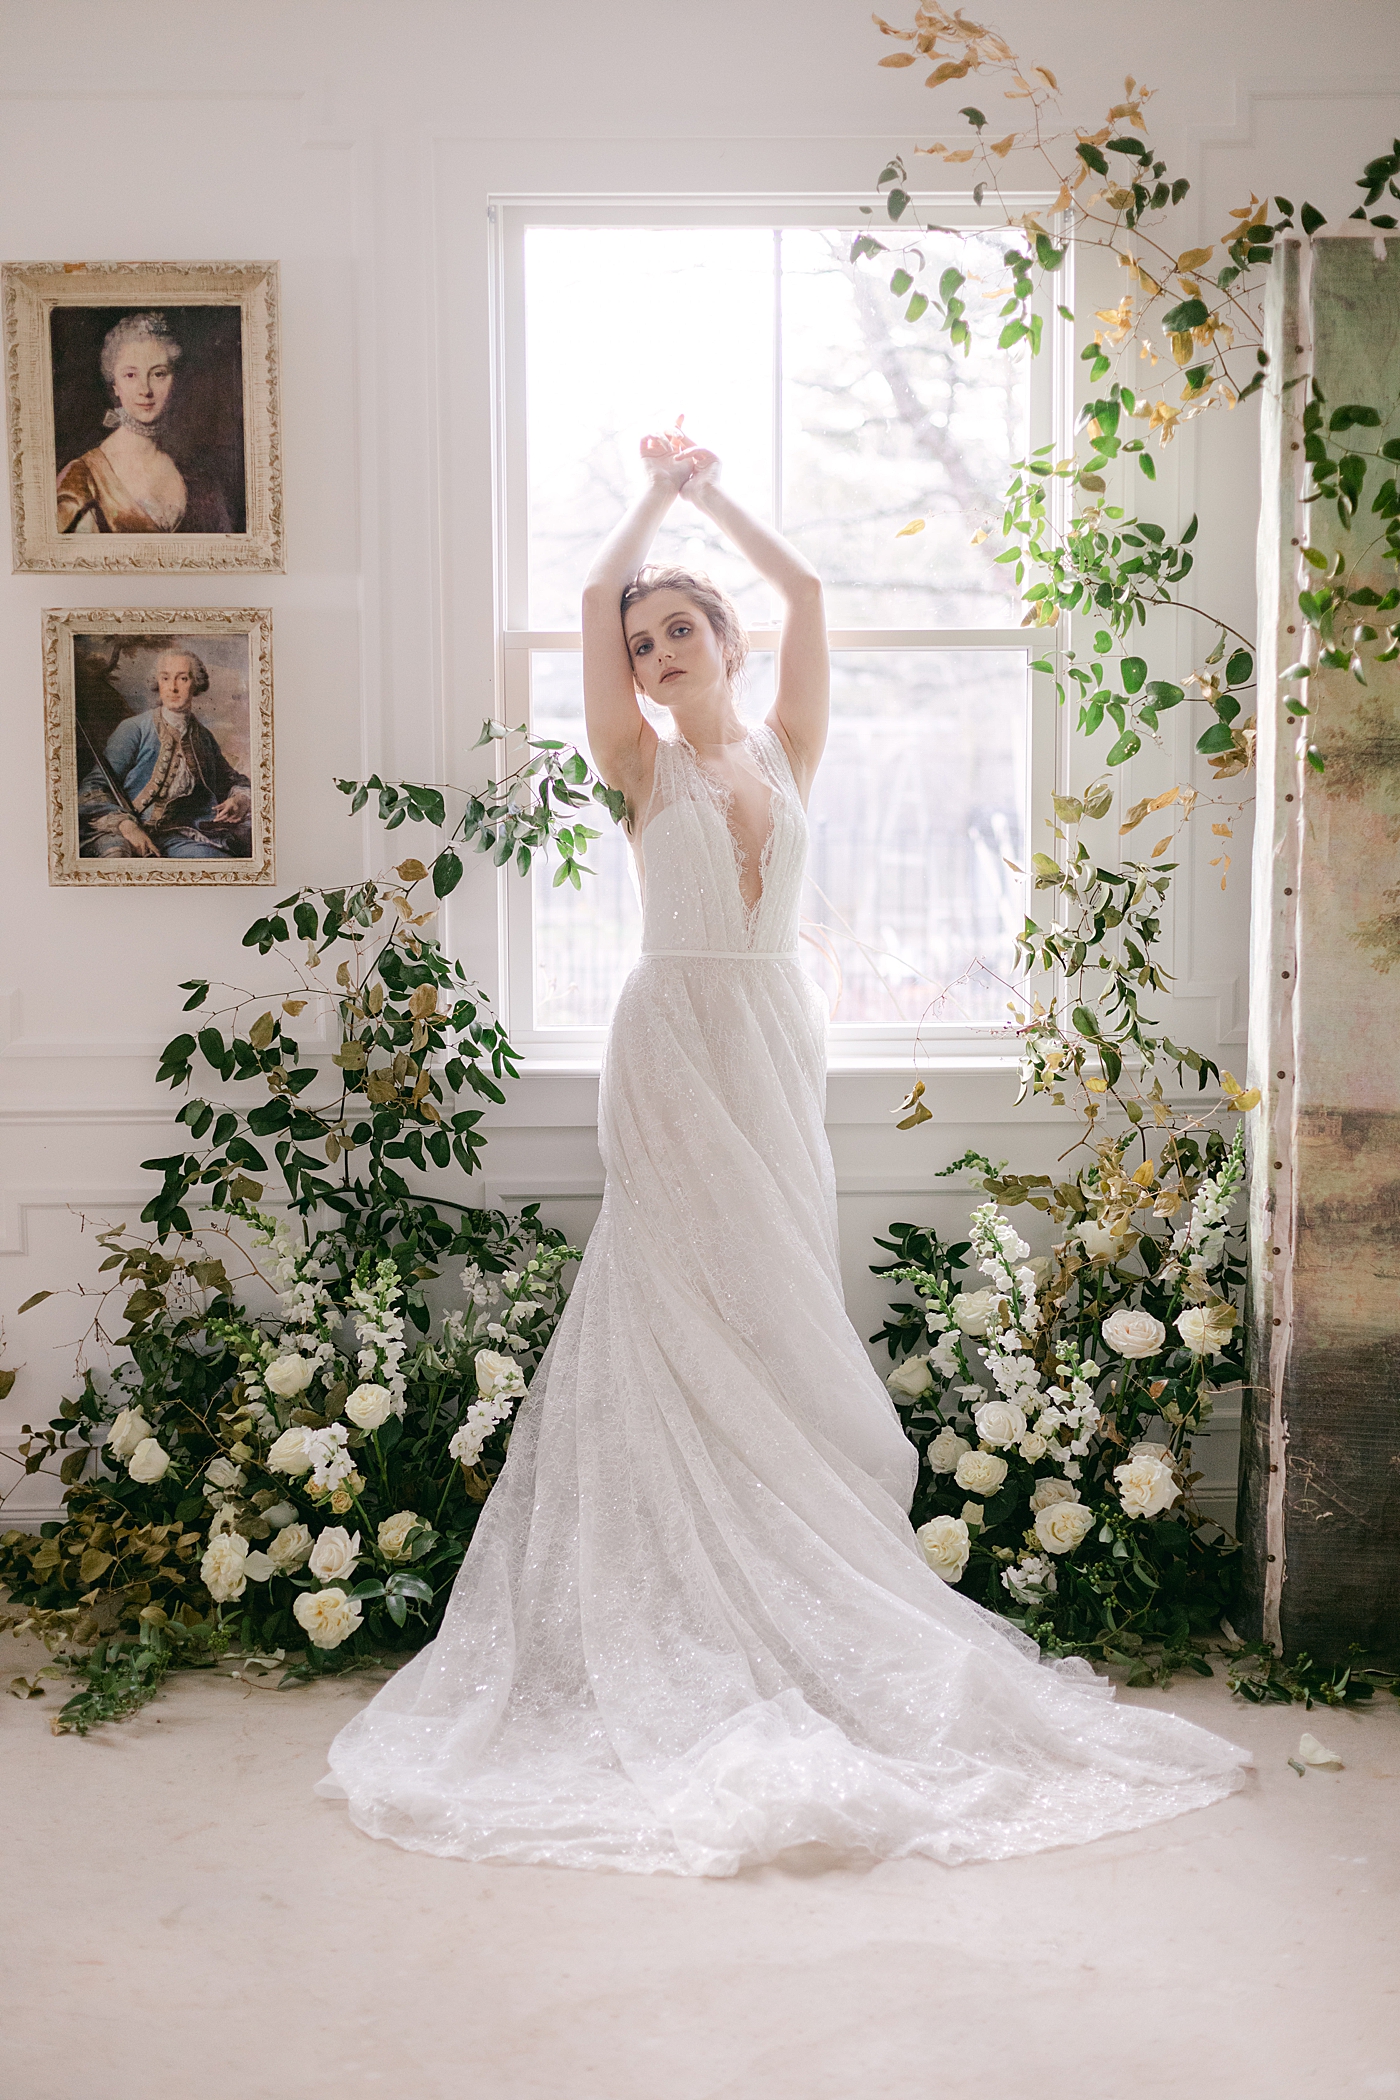 Bride standing near a window styled with florals | Photo by Hope Helmuth Photograpghy